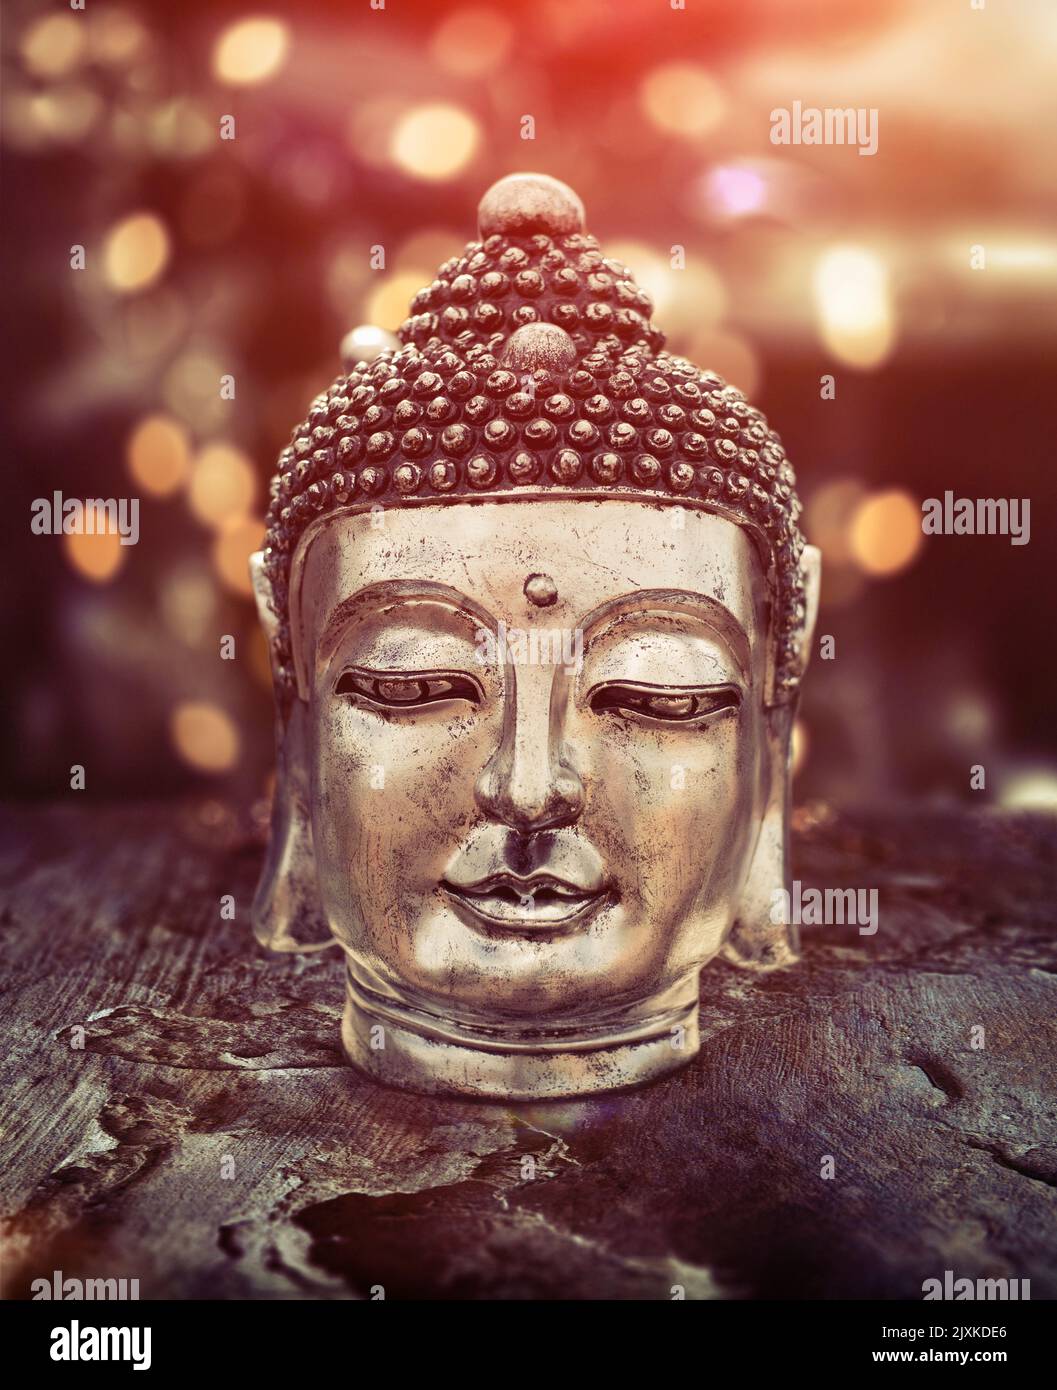 Buddha Head in silver on stone surface. Celebration Religious Festival Concept Stock Photo